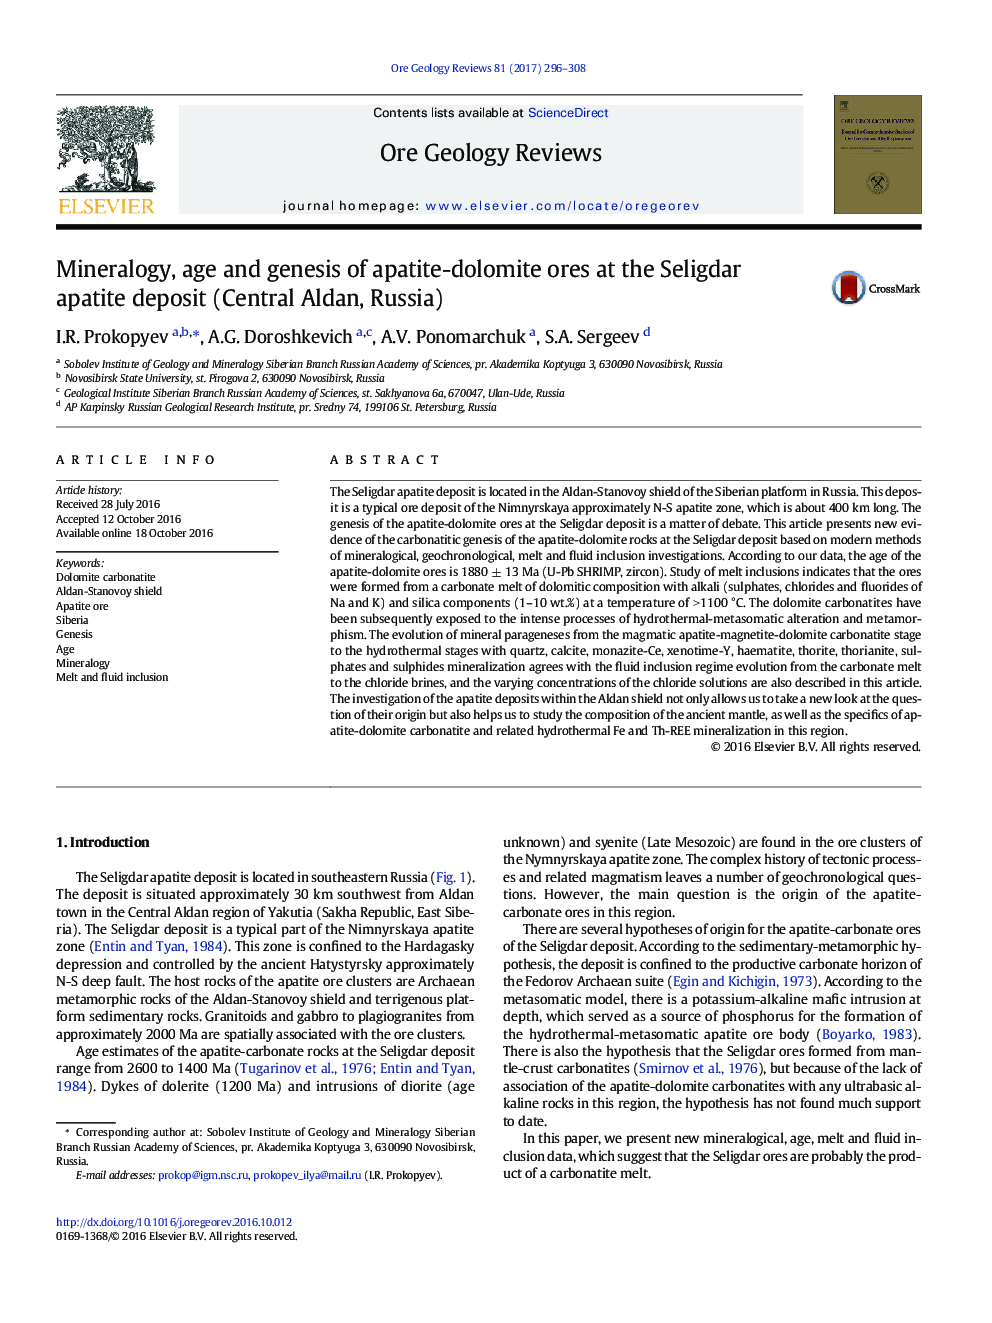 Mineralogy, age and genesis of apatite-dolomite ores at the Seligdar apatite deposit (Central Aldan, Russia)